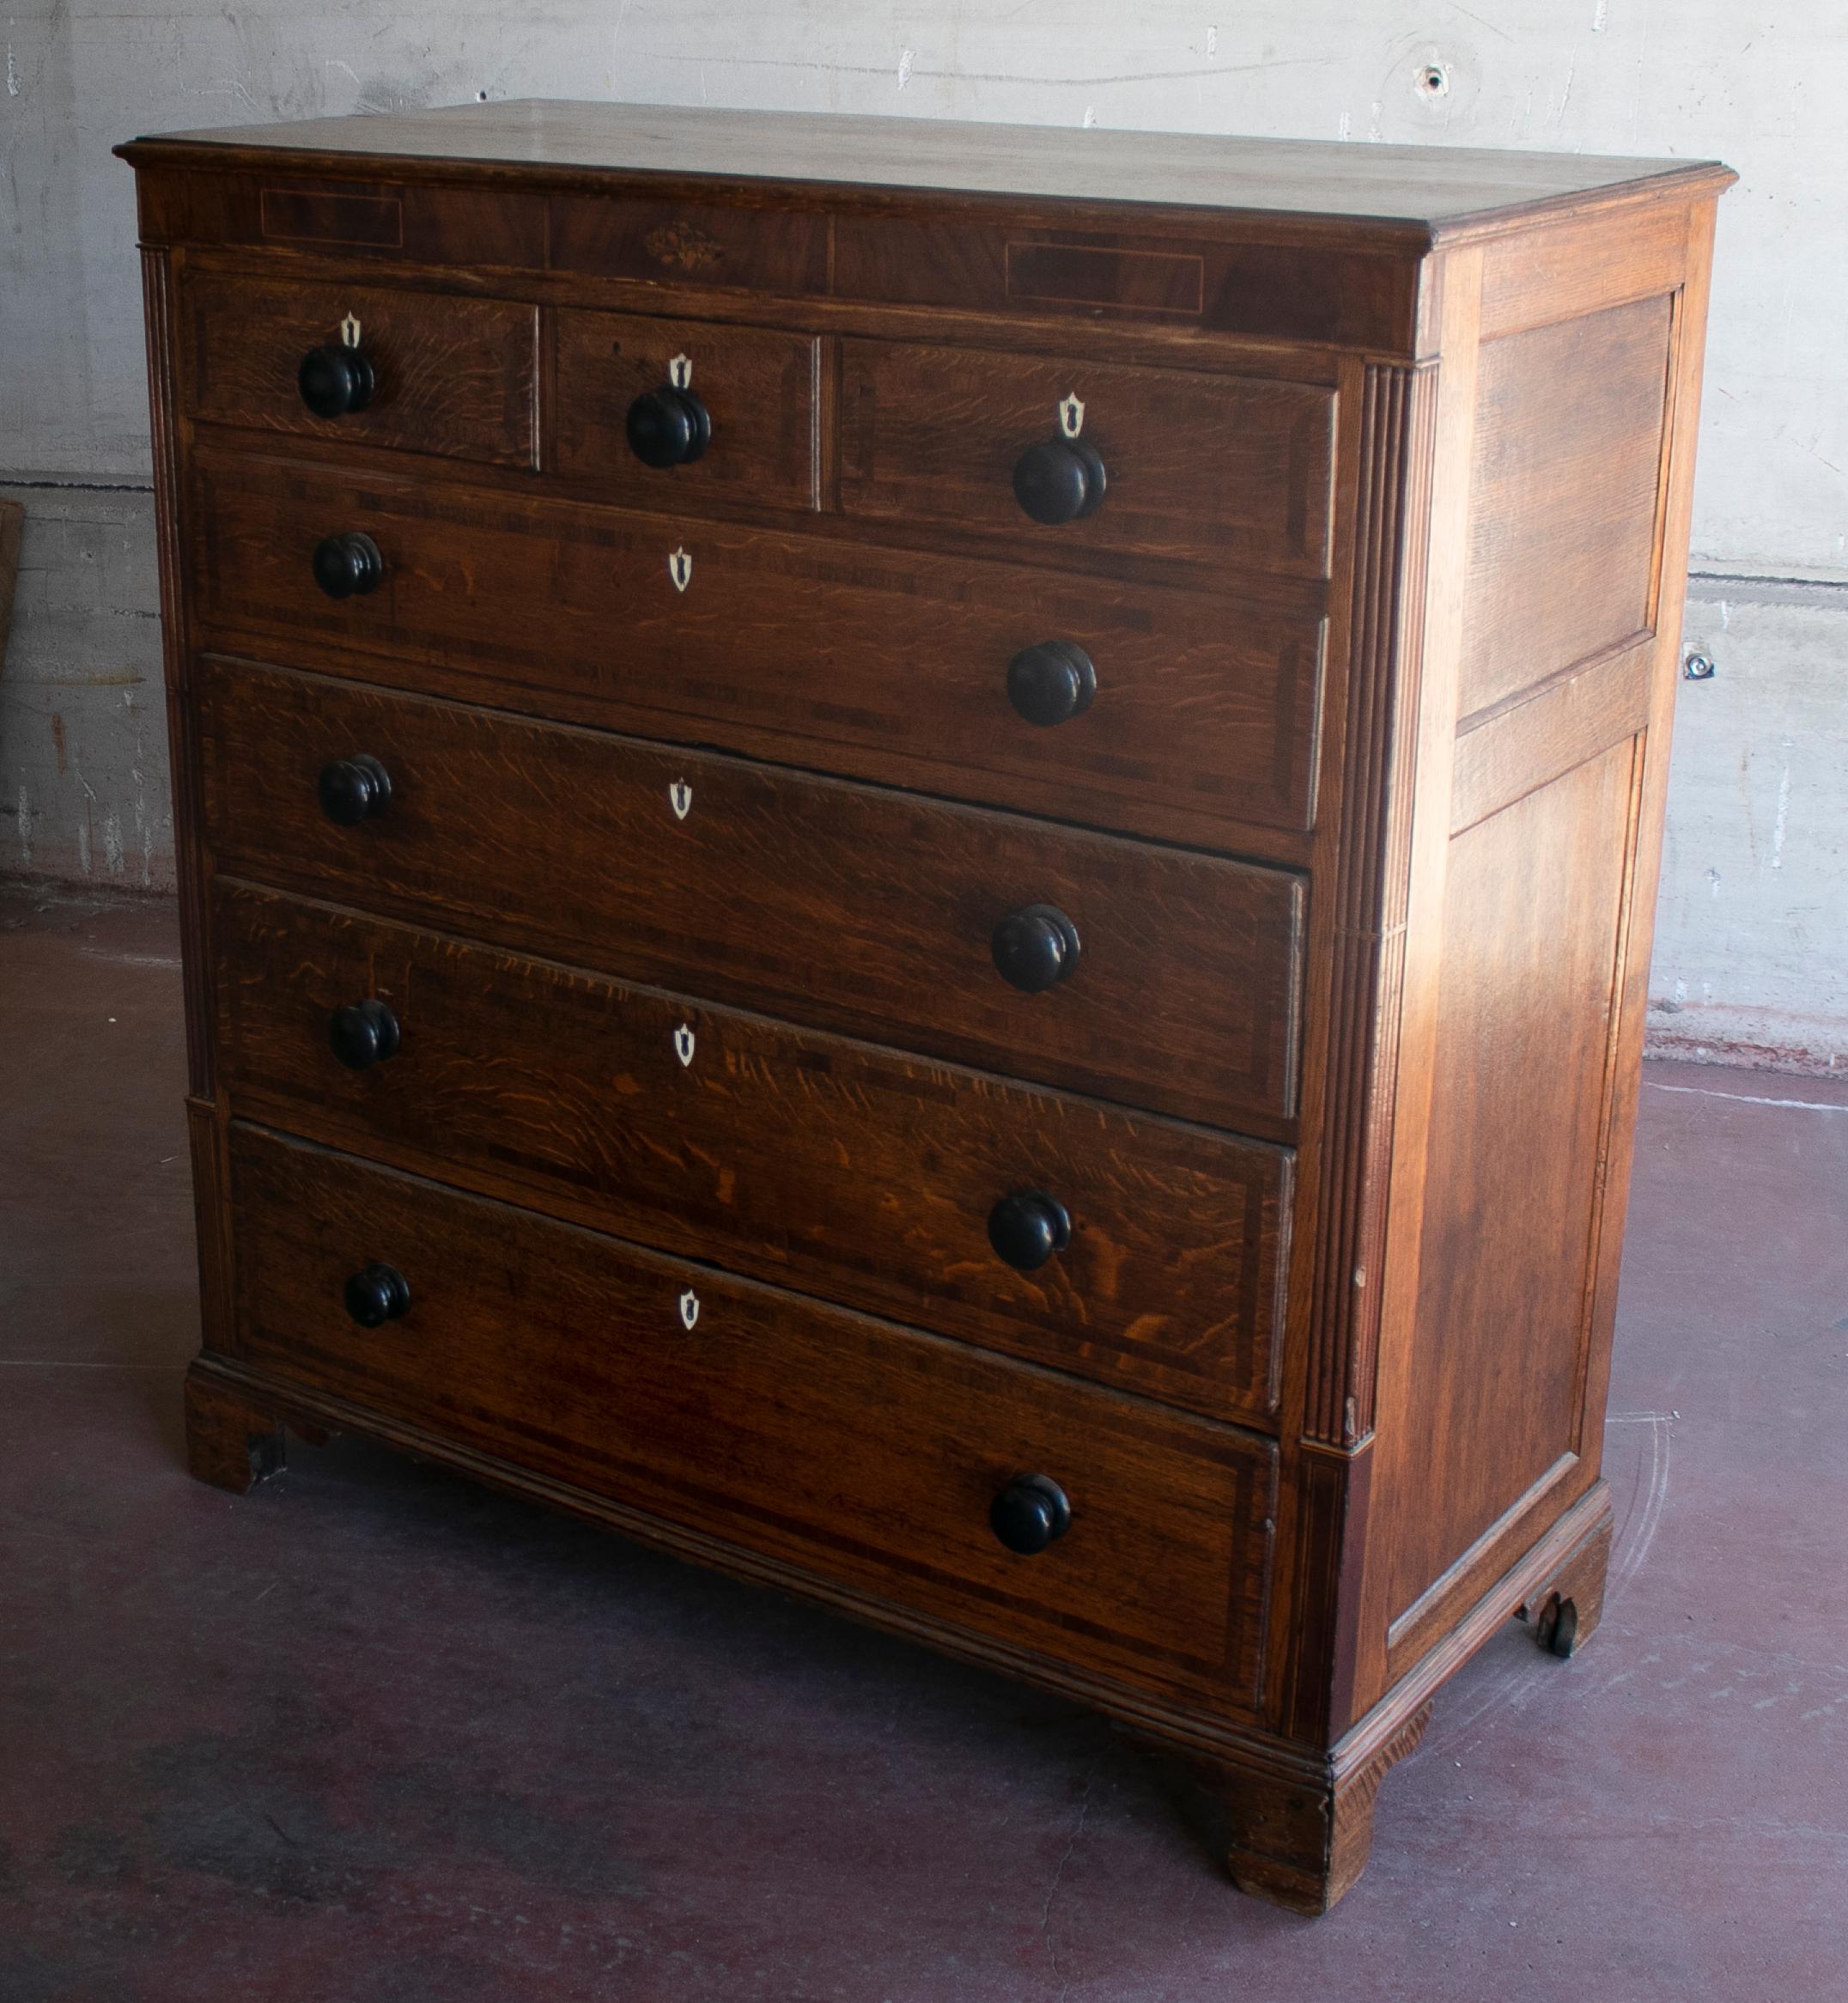 Spanish 19th Century English Mahogany Chest of Drawers with Inlay Decorations